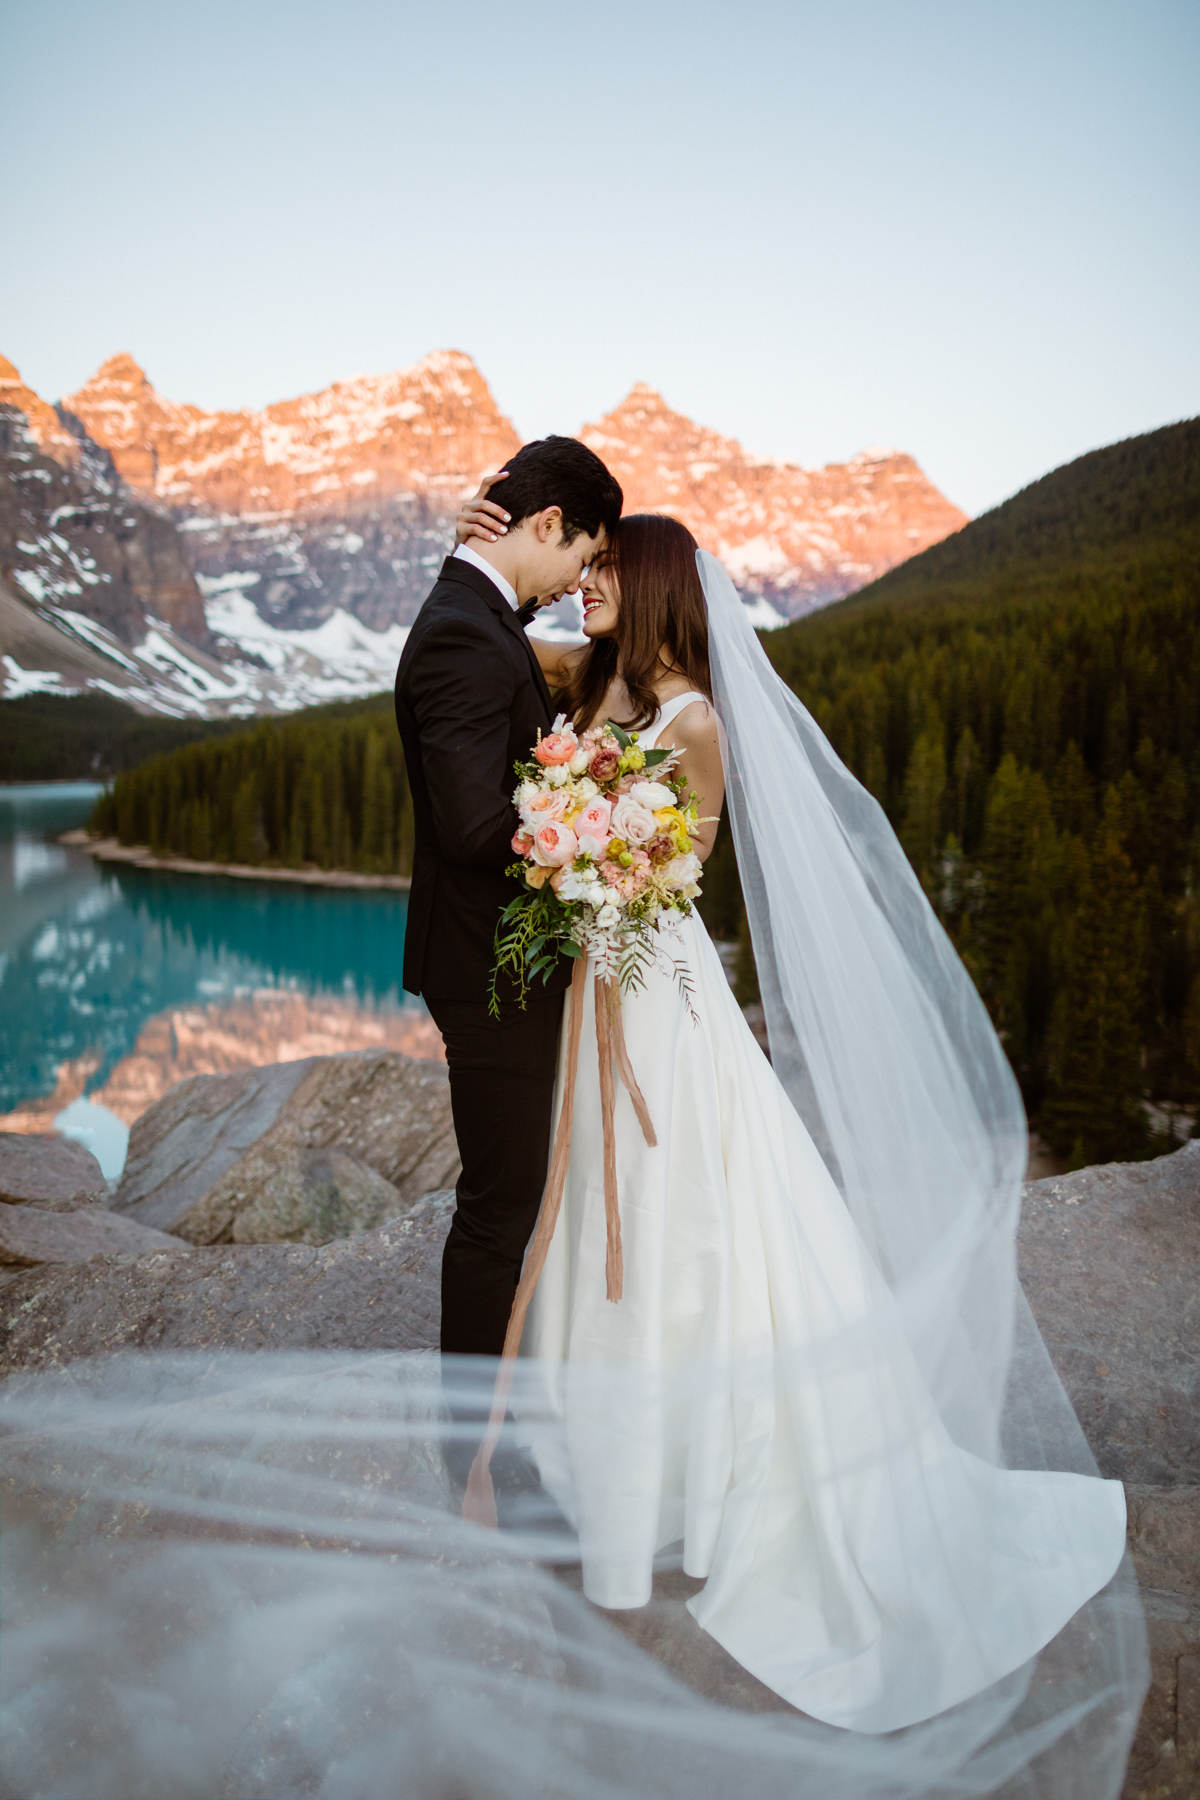 Banff pre wedding photography at Moraine Lake photoshoot in Canada